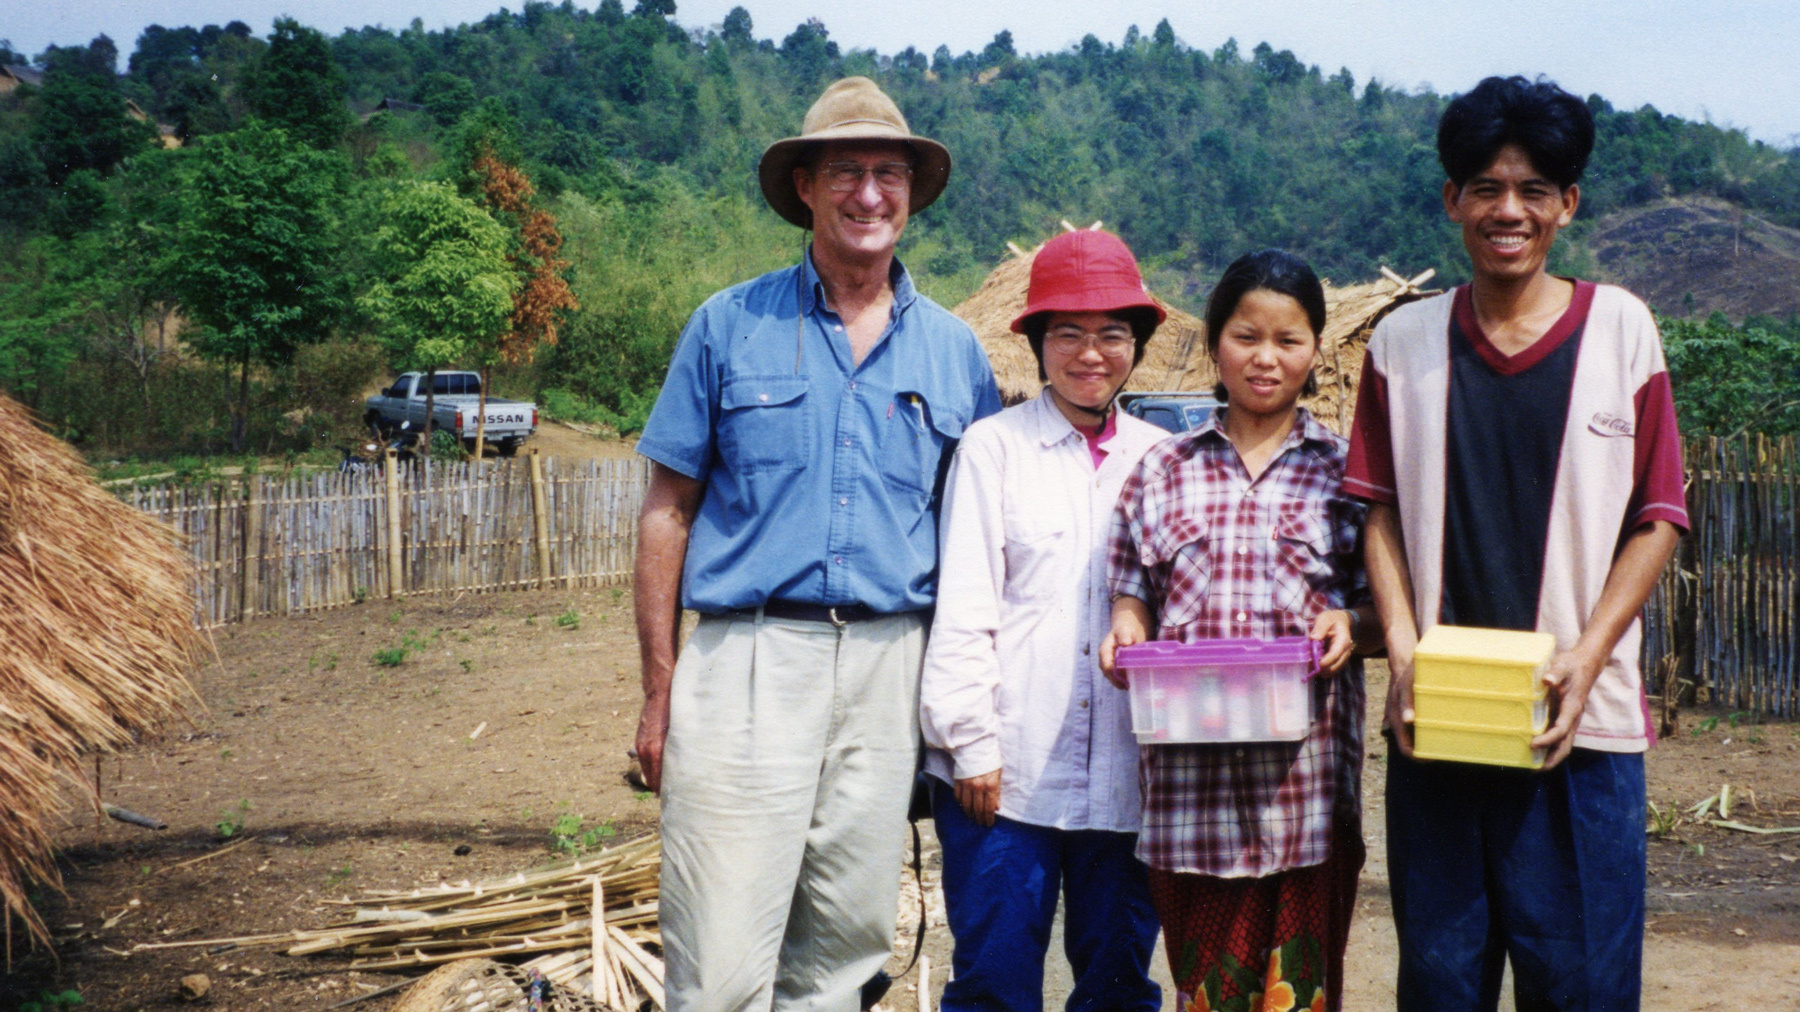 Customer Dr Anthony Radford smiling with three health care workers in rural Northern Thailand Akha village